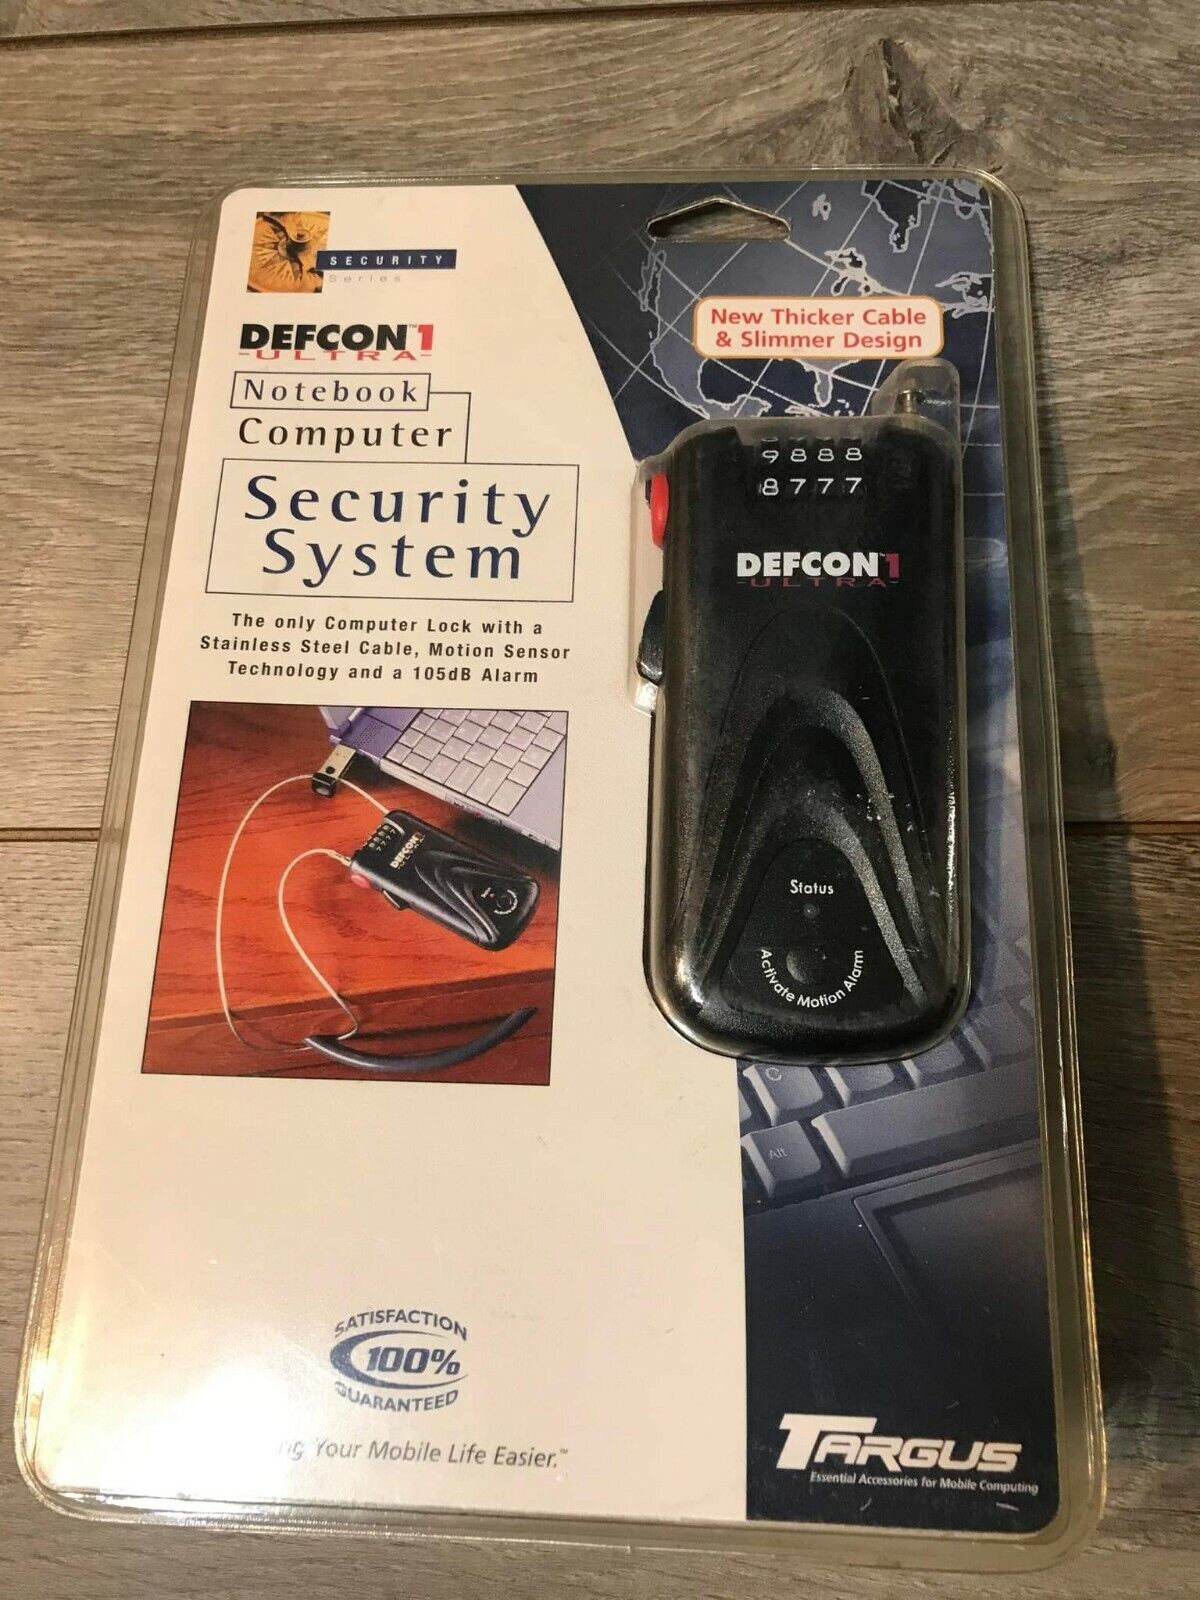 DEFCON 1 Notebook Computer Security System by Targus Laptop / Luggage Lock 